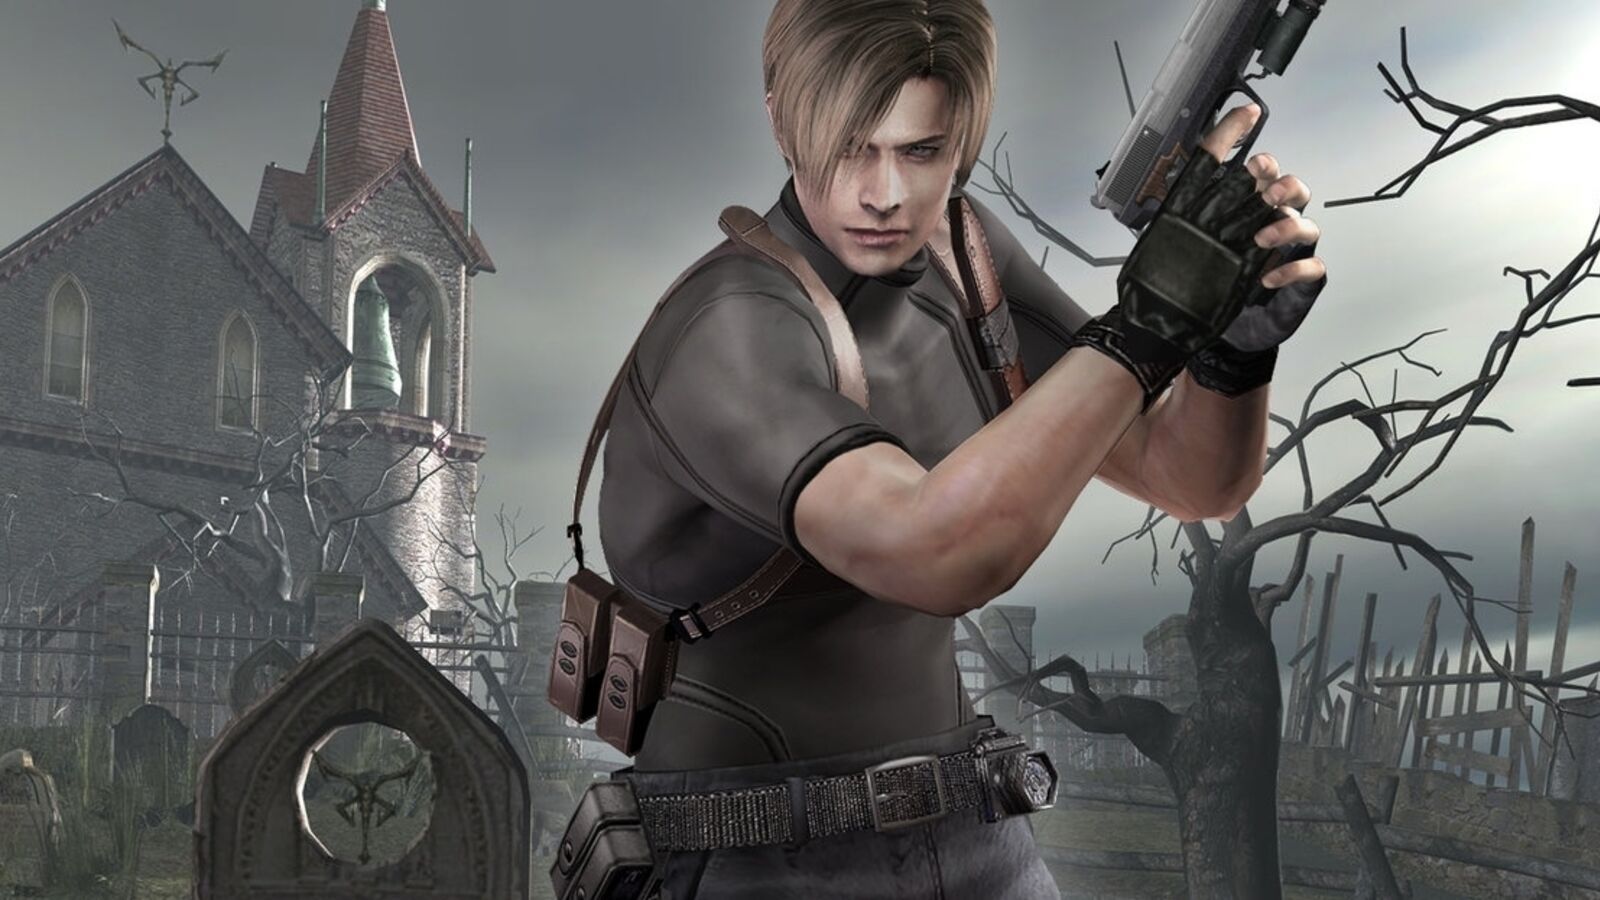 Resident Evil 4 Helped Me Embrace My Love of Horror